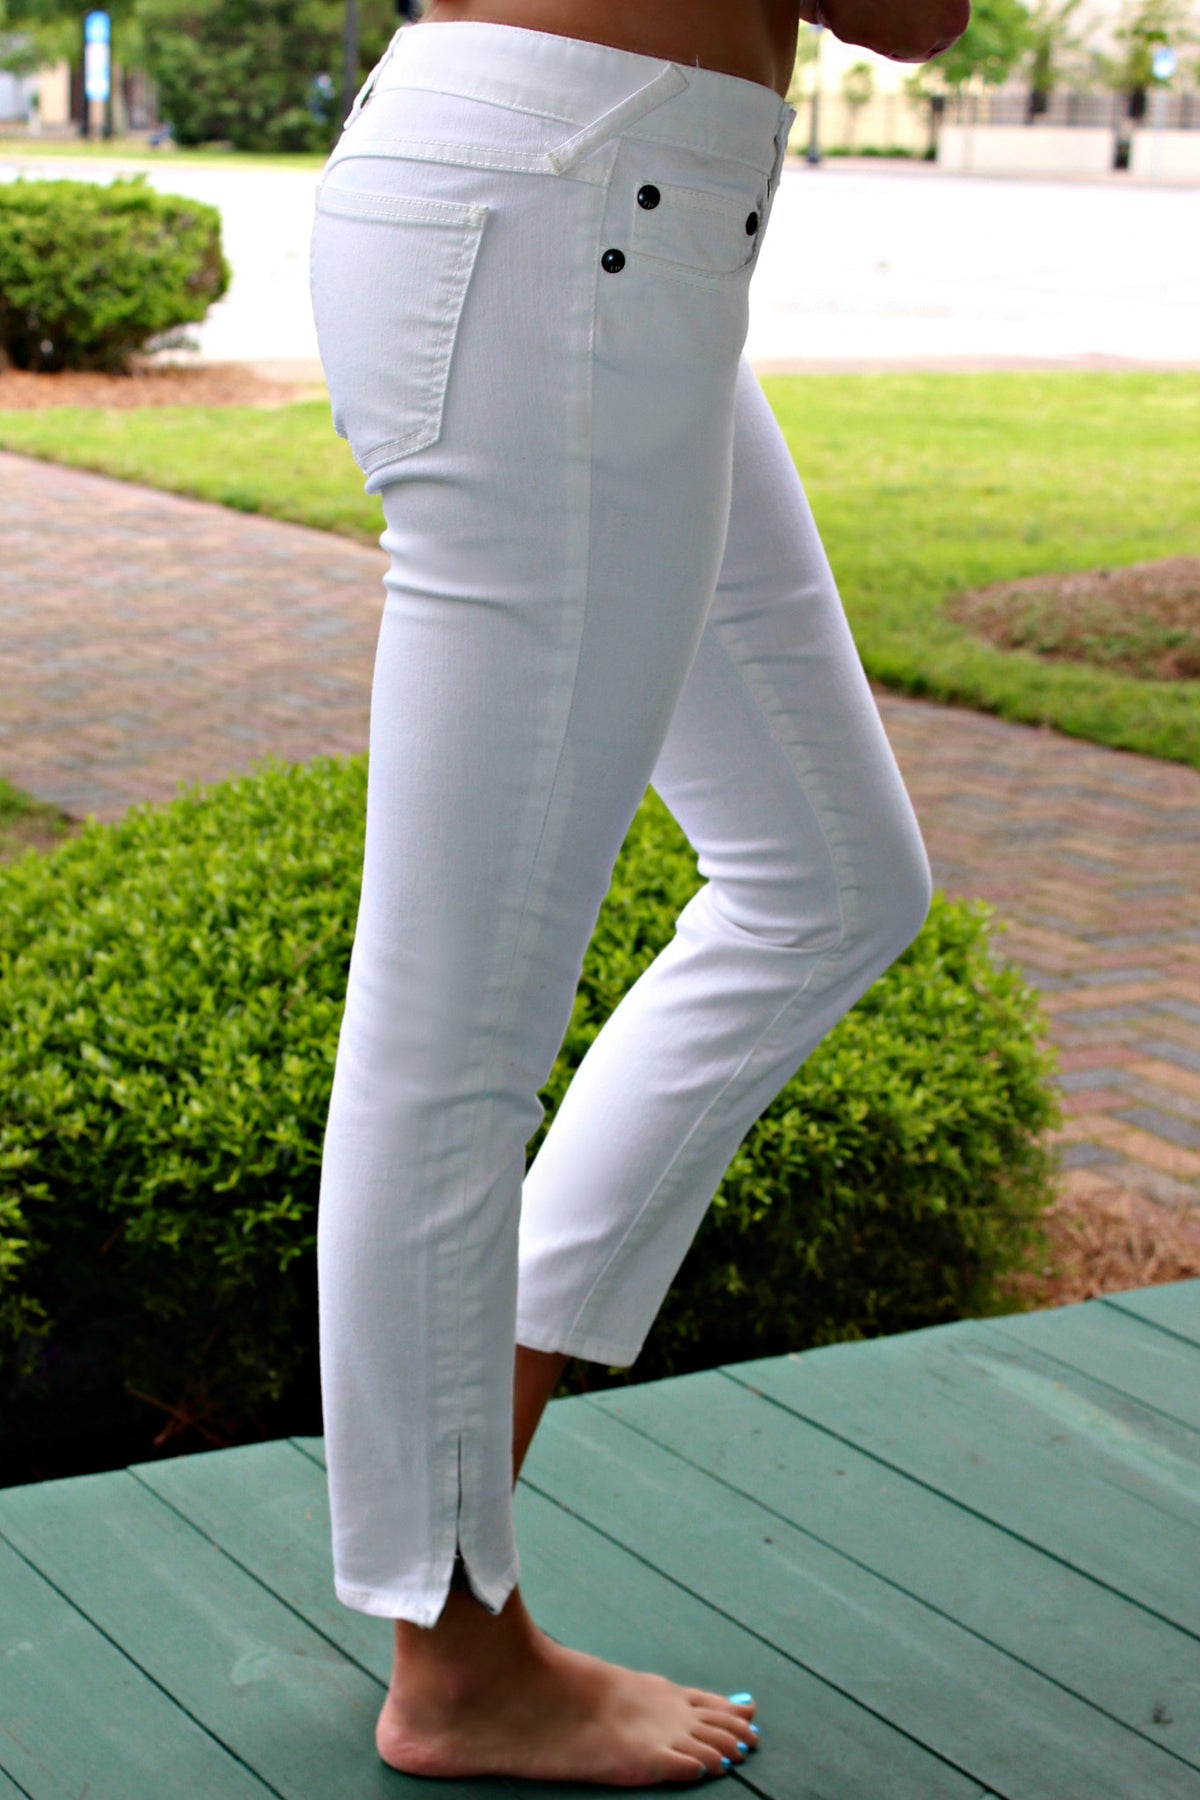 Free People: Cropped Skinny Jeans, White